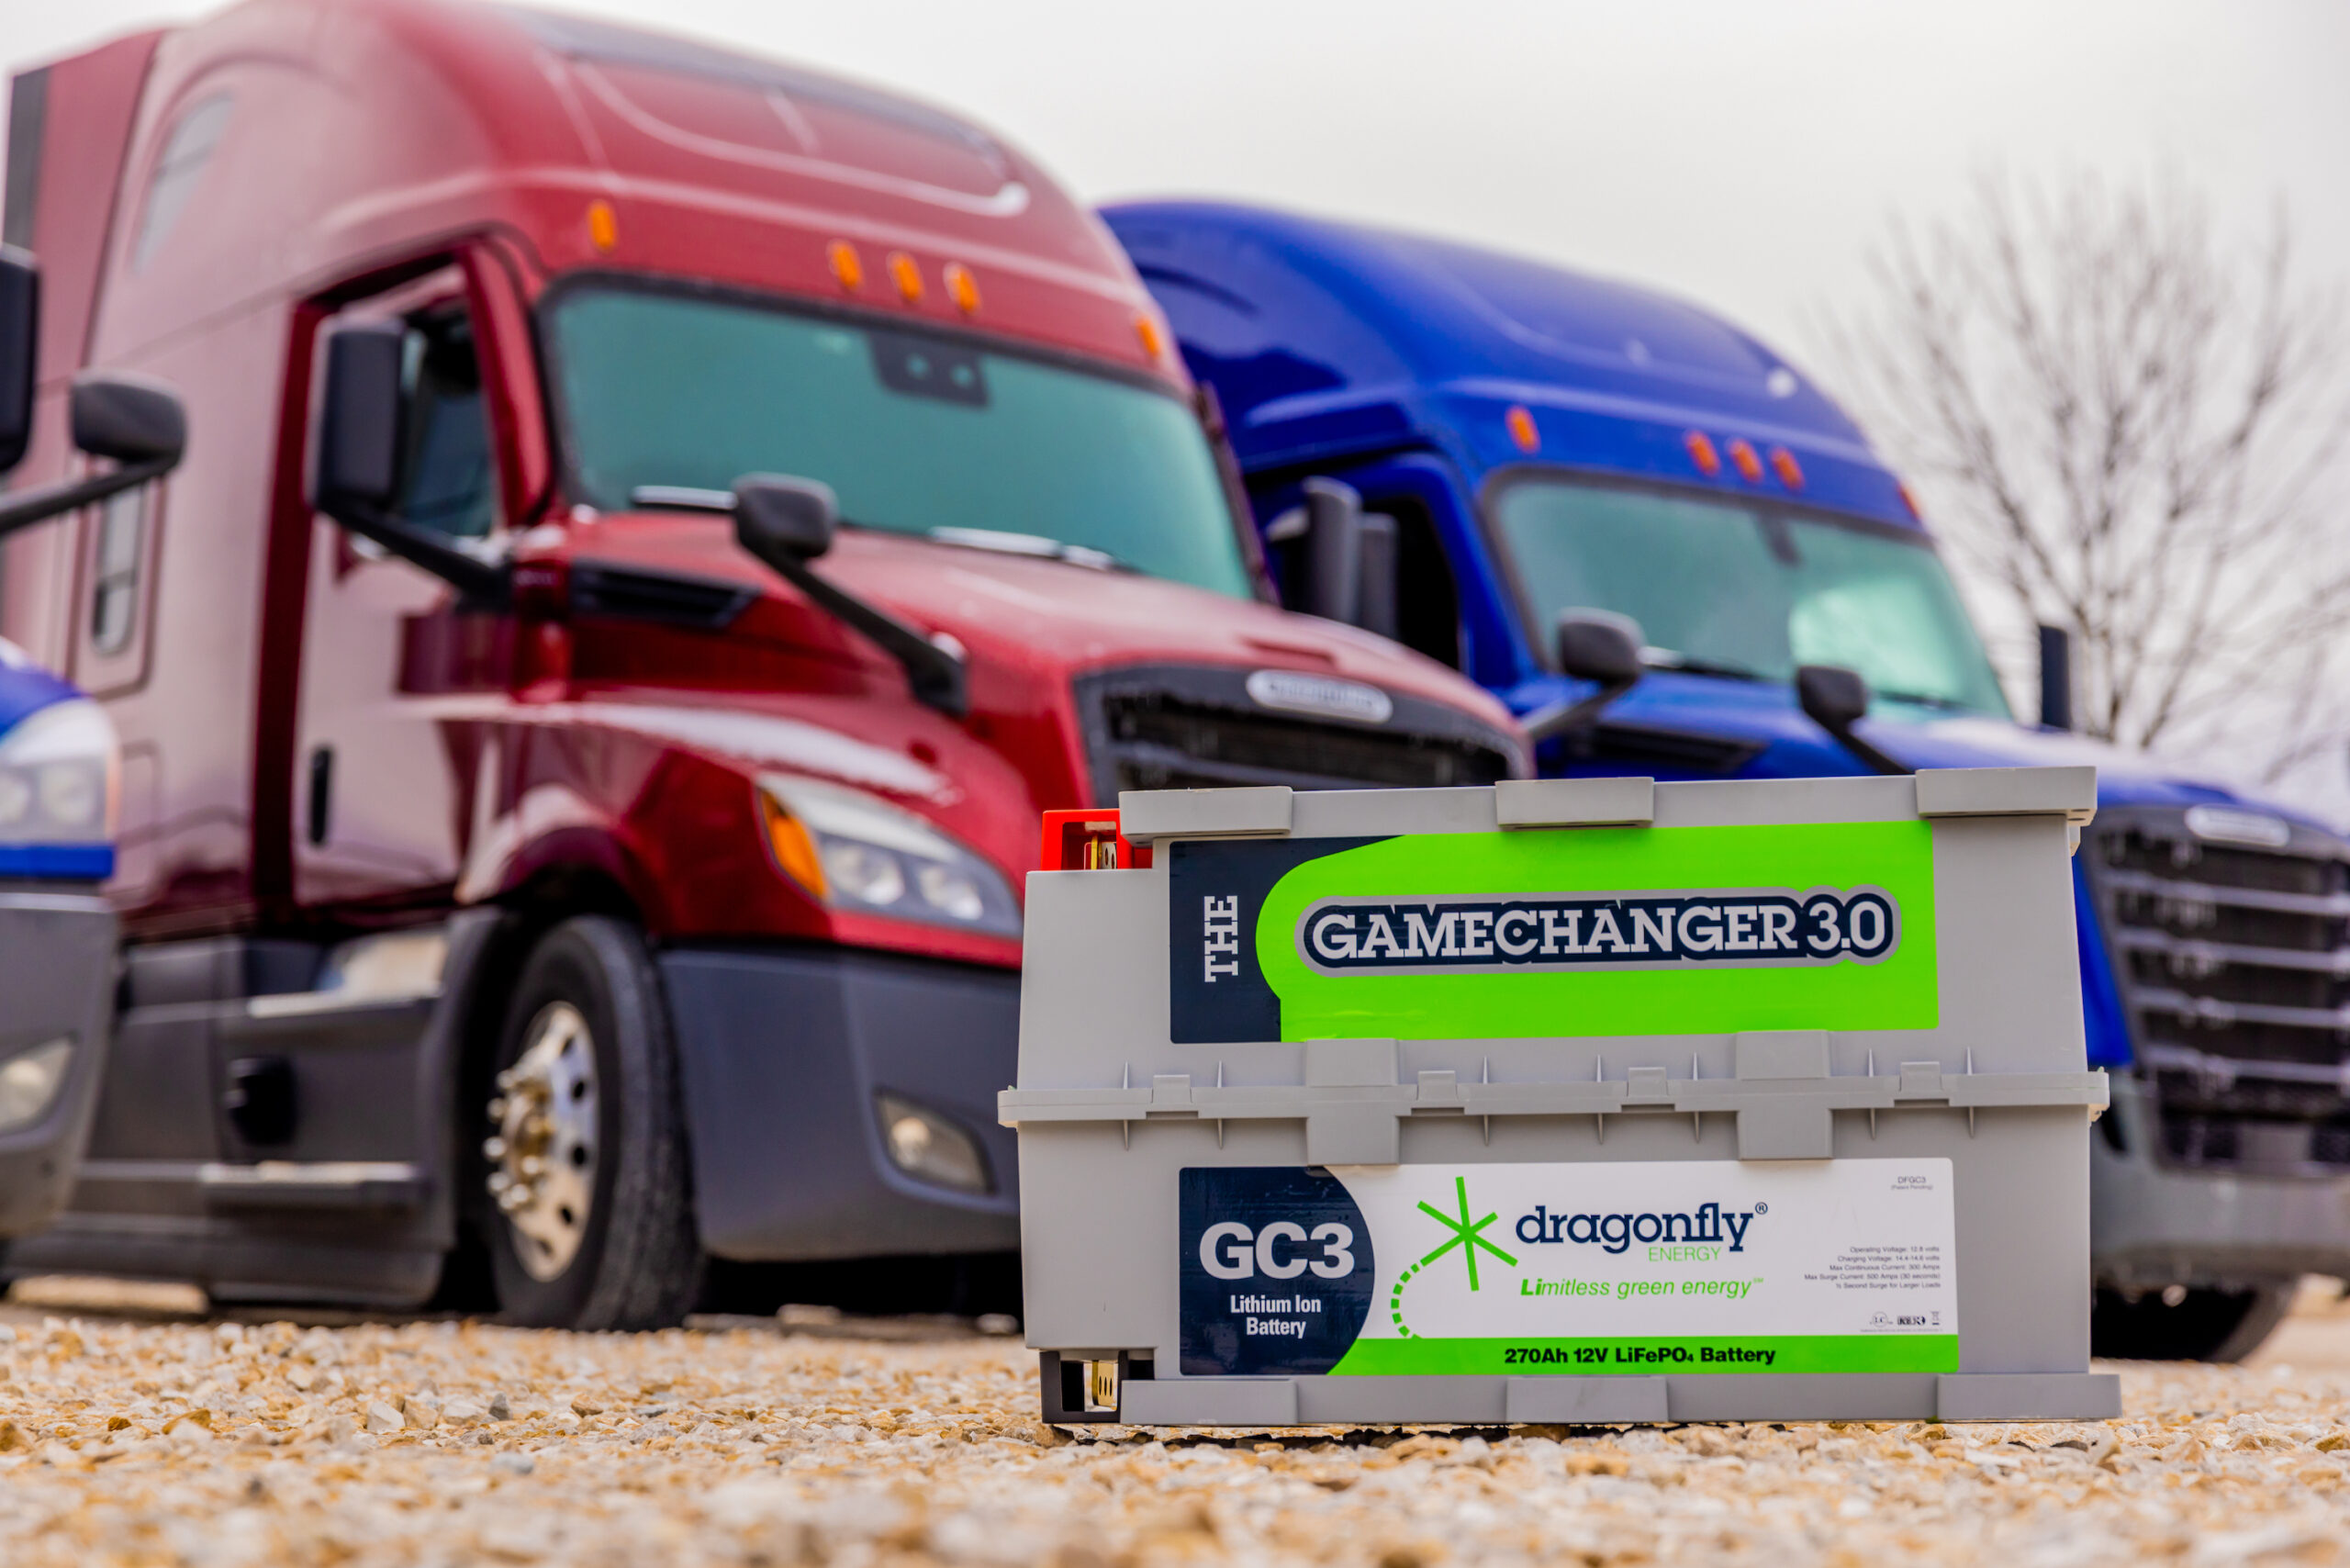 Dragonfly Energy's Gamechanger battery is a great option for long-haul trucking APUs. In this image it is placd in front of two long-haul trucks with sleepers.